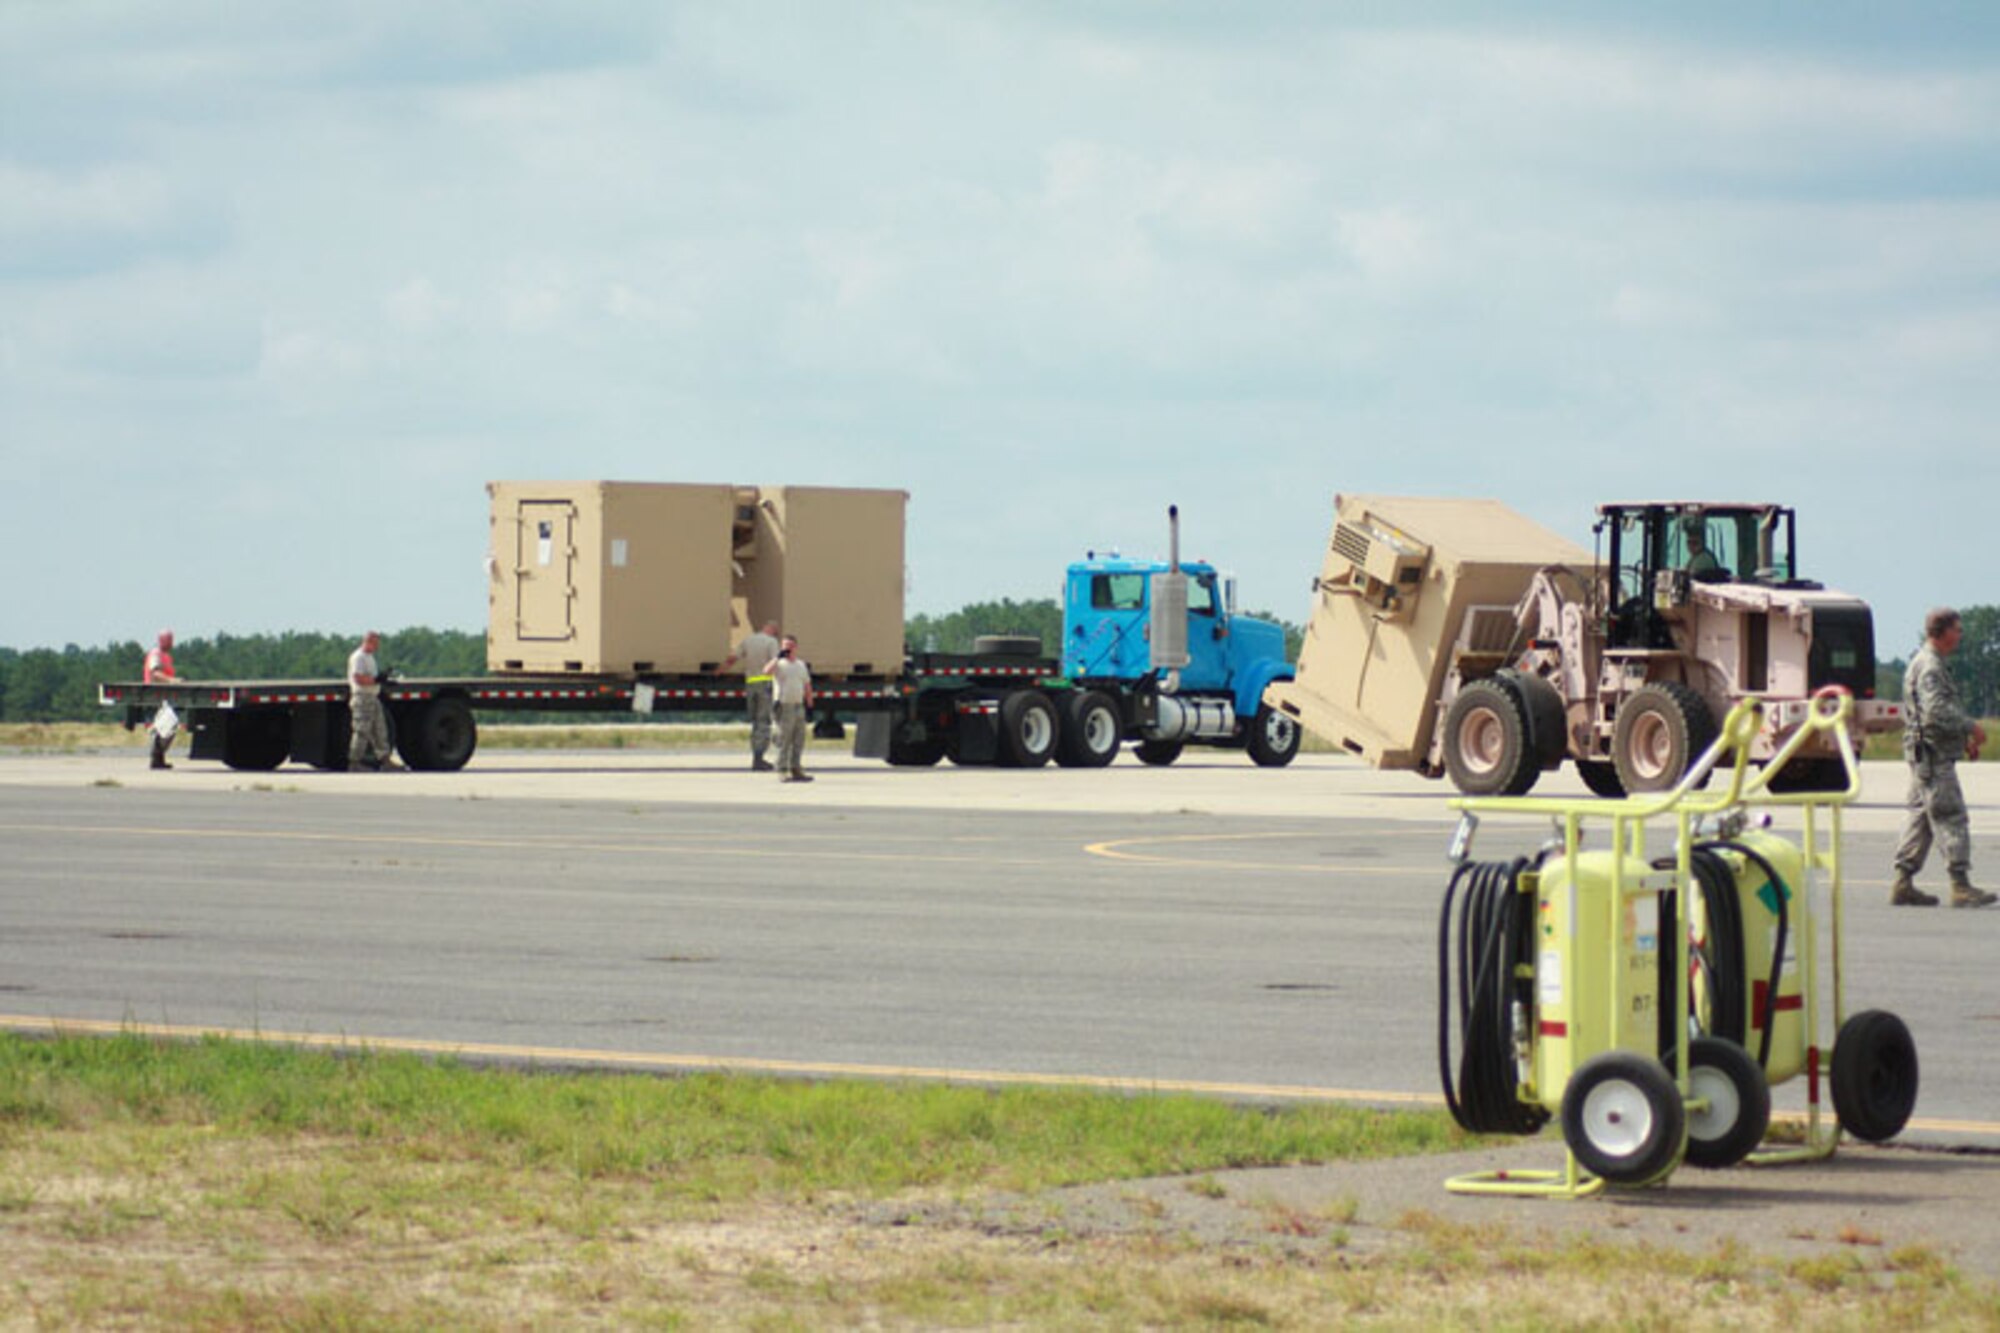 Soldiers and Airmen from exercise Eagle Flag offload pallets of food, water and shelter to be distributed to simulated local villages in a country needing humaniatiran assistance at Joint Base McGuire-Dix-Lakehurst, N.J. July 27.  (U.S. Air Force photo by Master Sgt. Phil Speck/Released)
